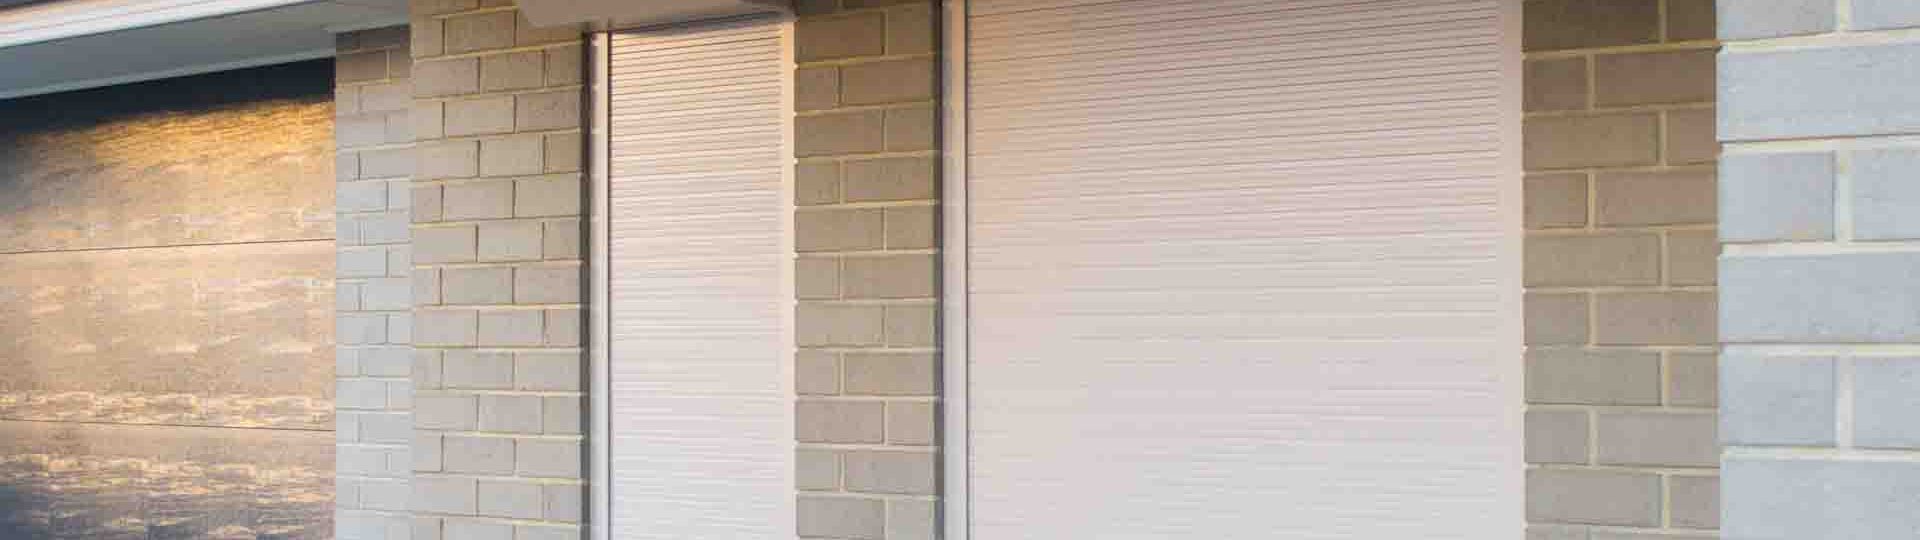 Australian Custom Made Roller Shutters - Free Measure and Quote in Adelaide, Sydney, Melbourne, Canberra, Brisbane, Perth & Australia Wide - Australian Outdoor Living